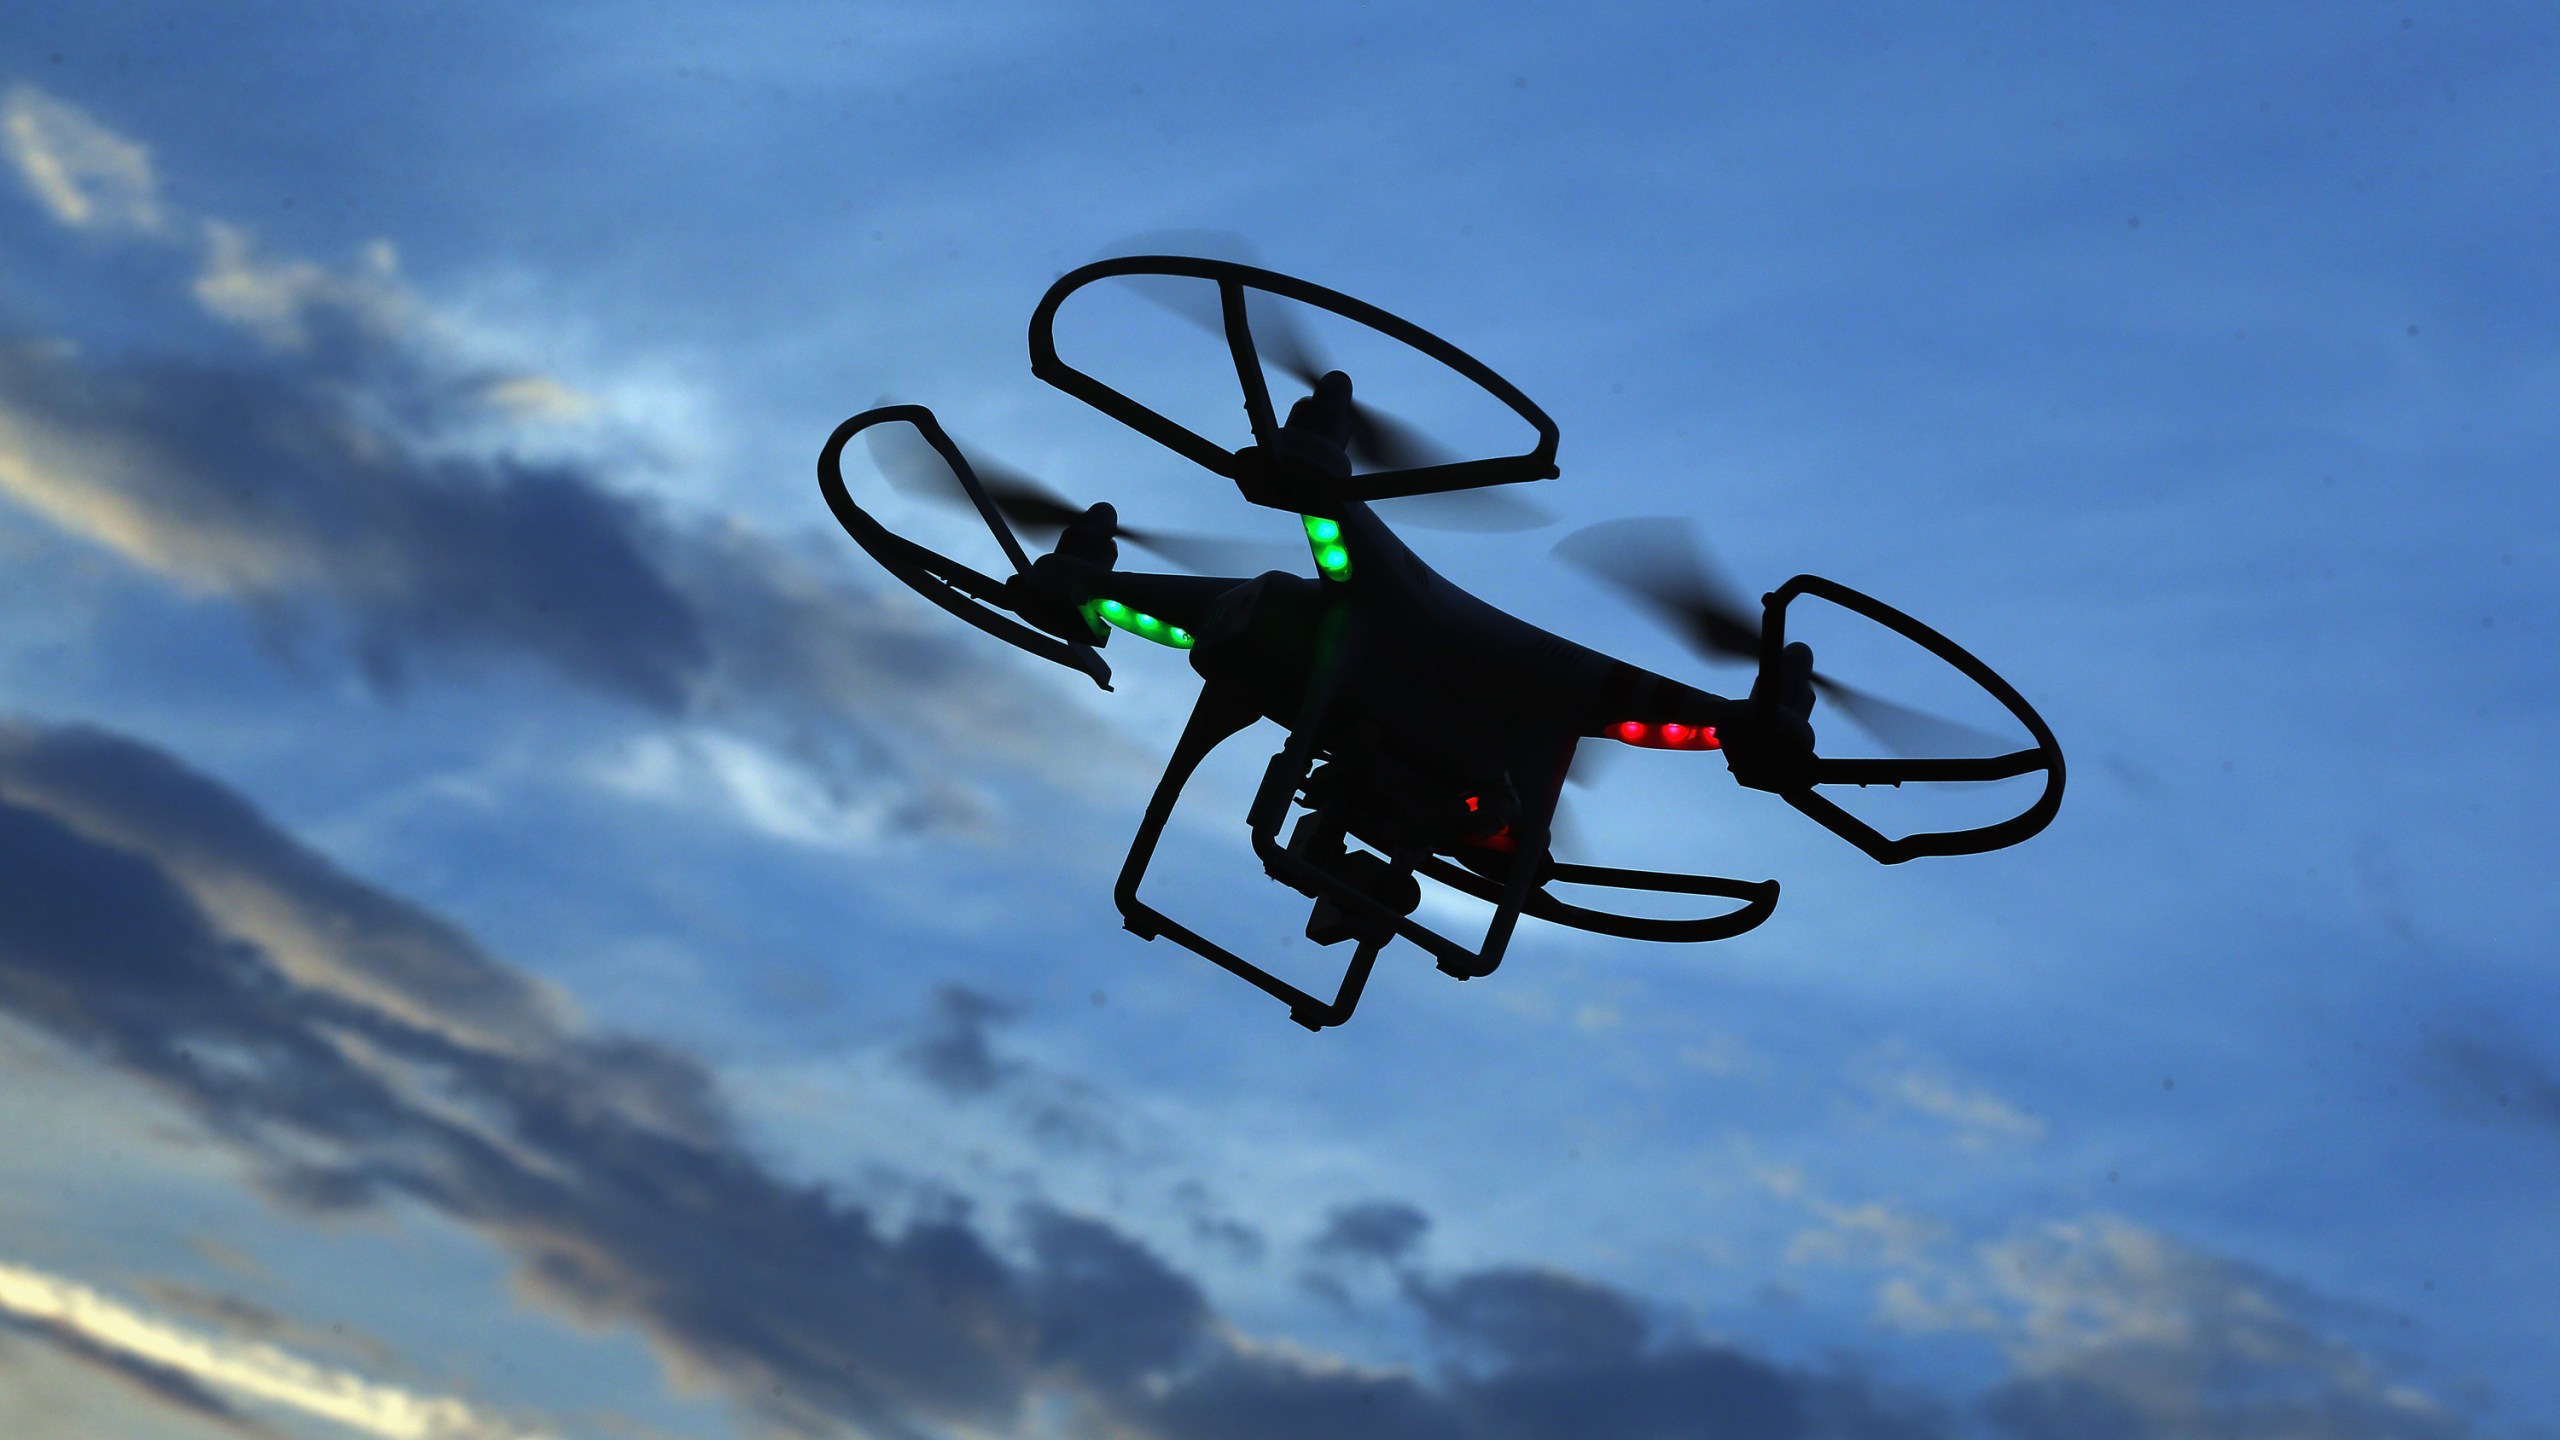 This undated file photo shows a drone in flight. (Credit: Bruce Bennett/Getty Images)